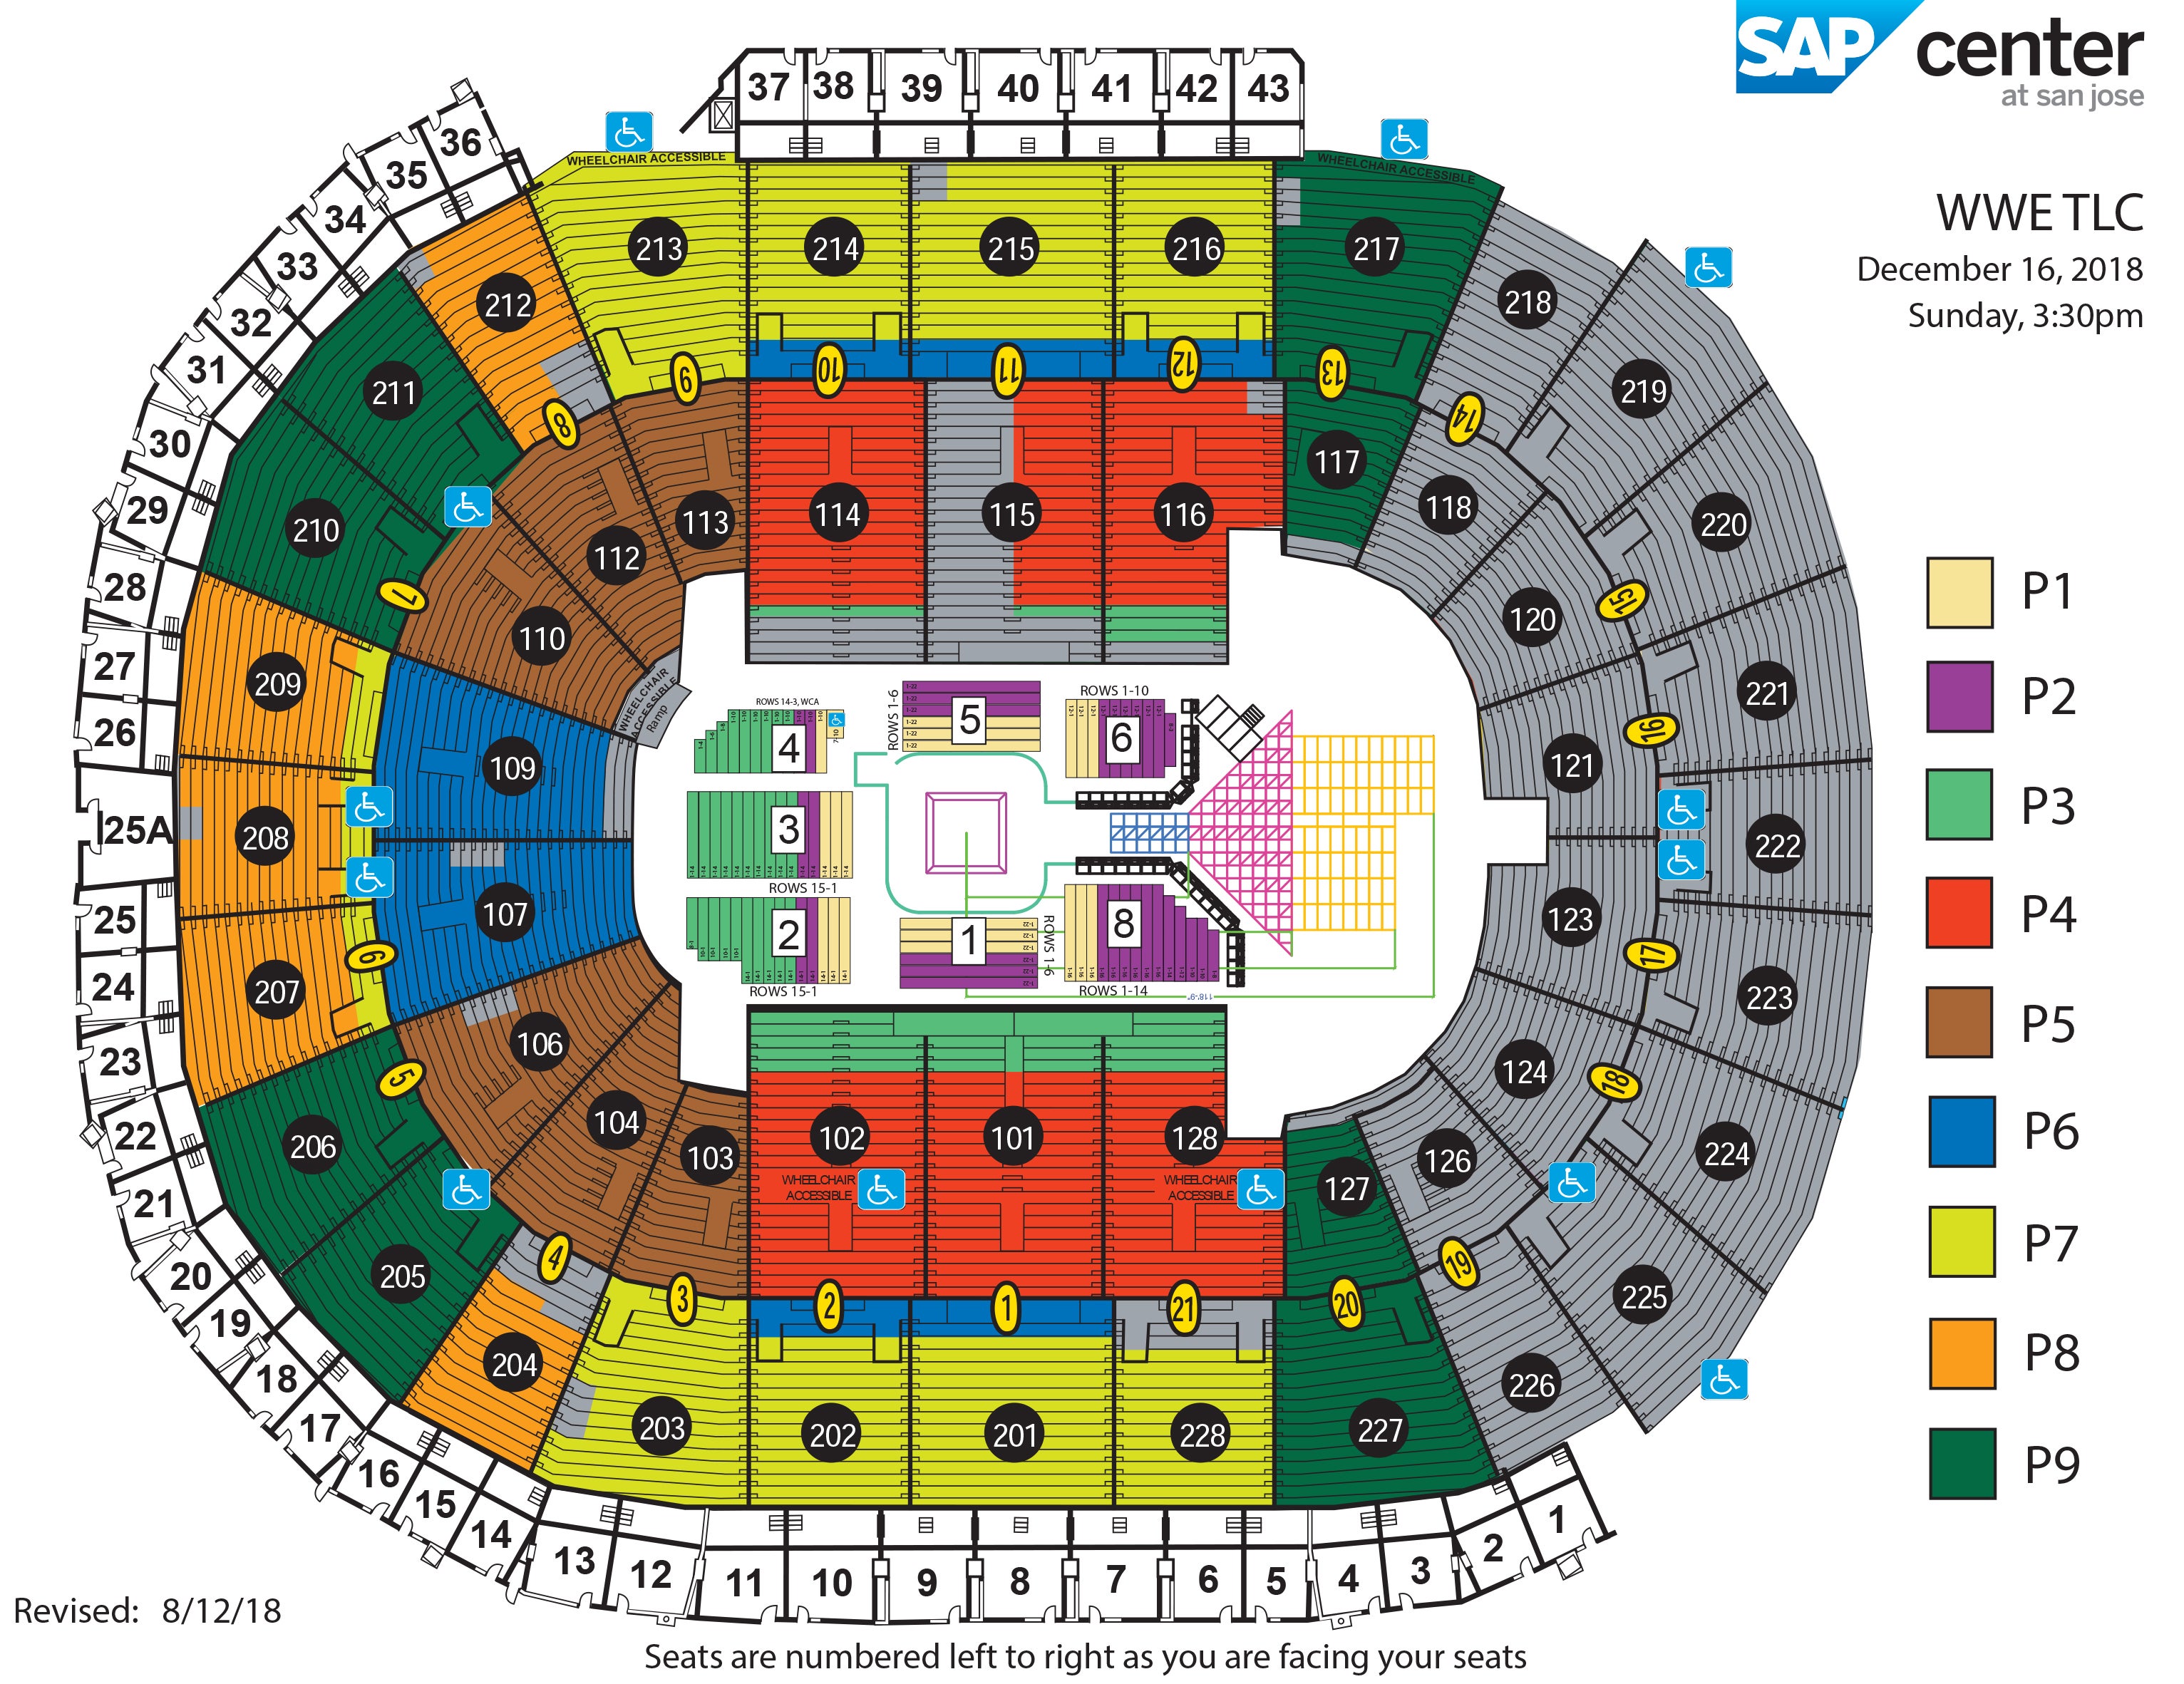 Breakdown of the SAP Center at San Jose Seating Chart